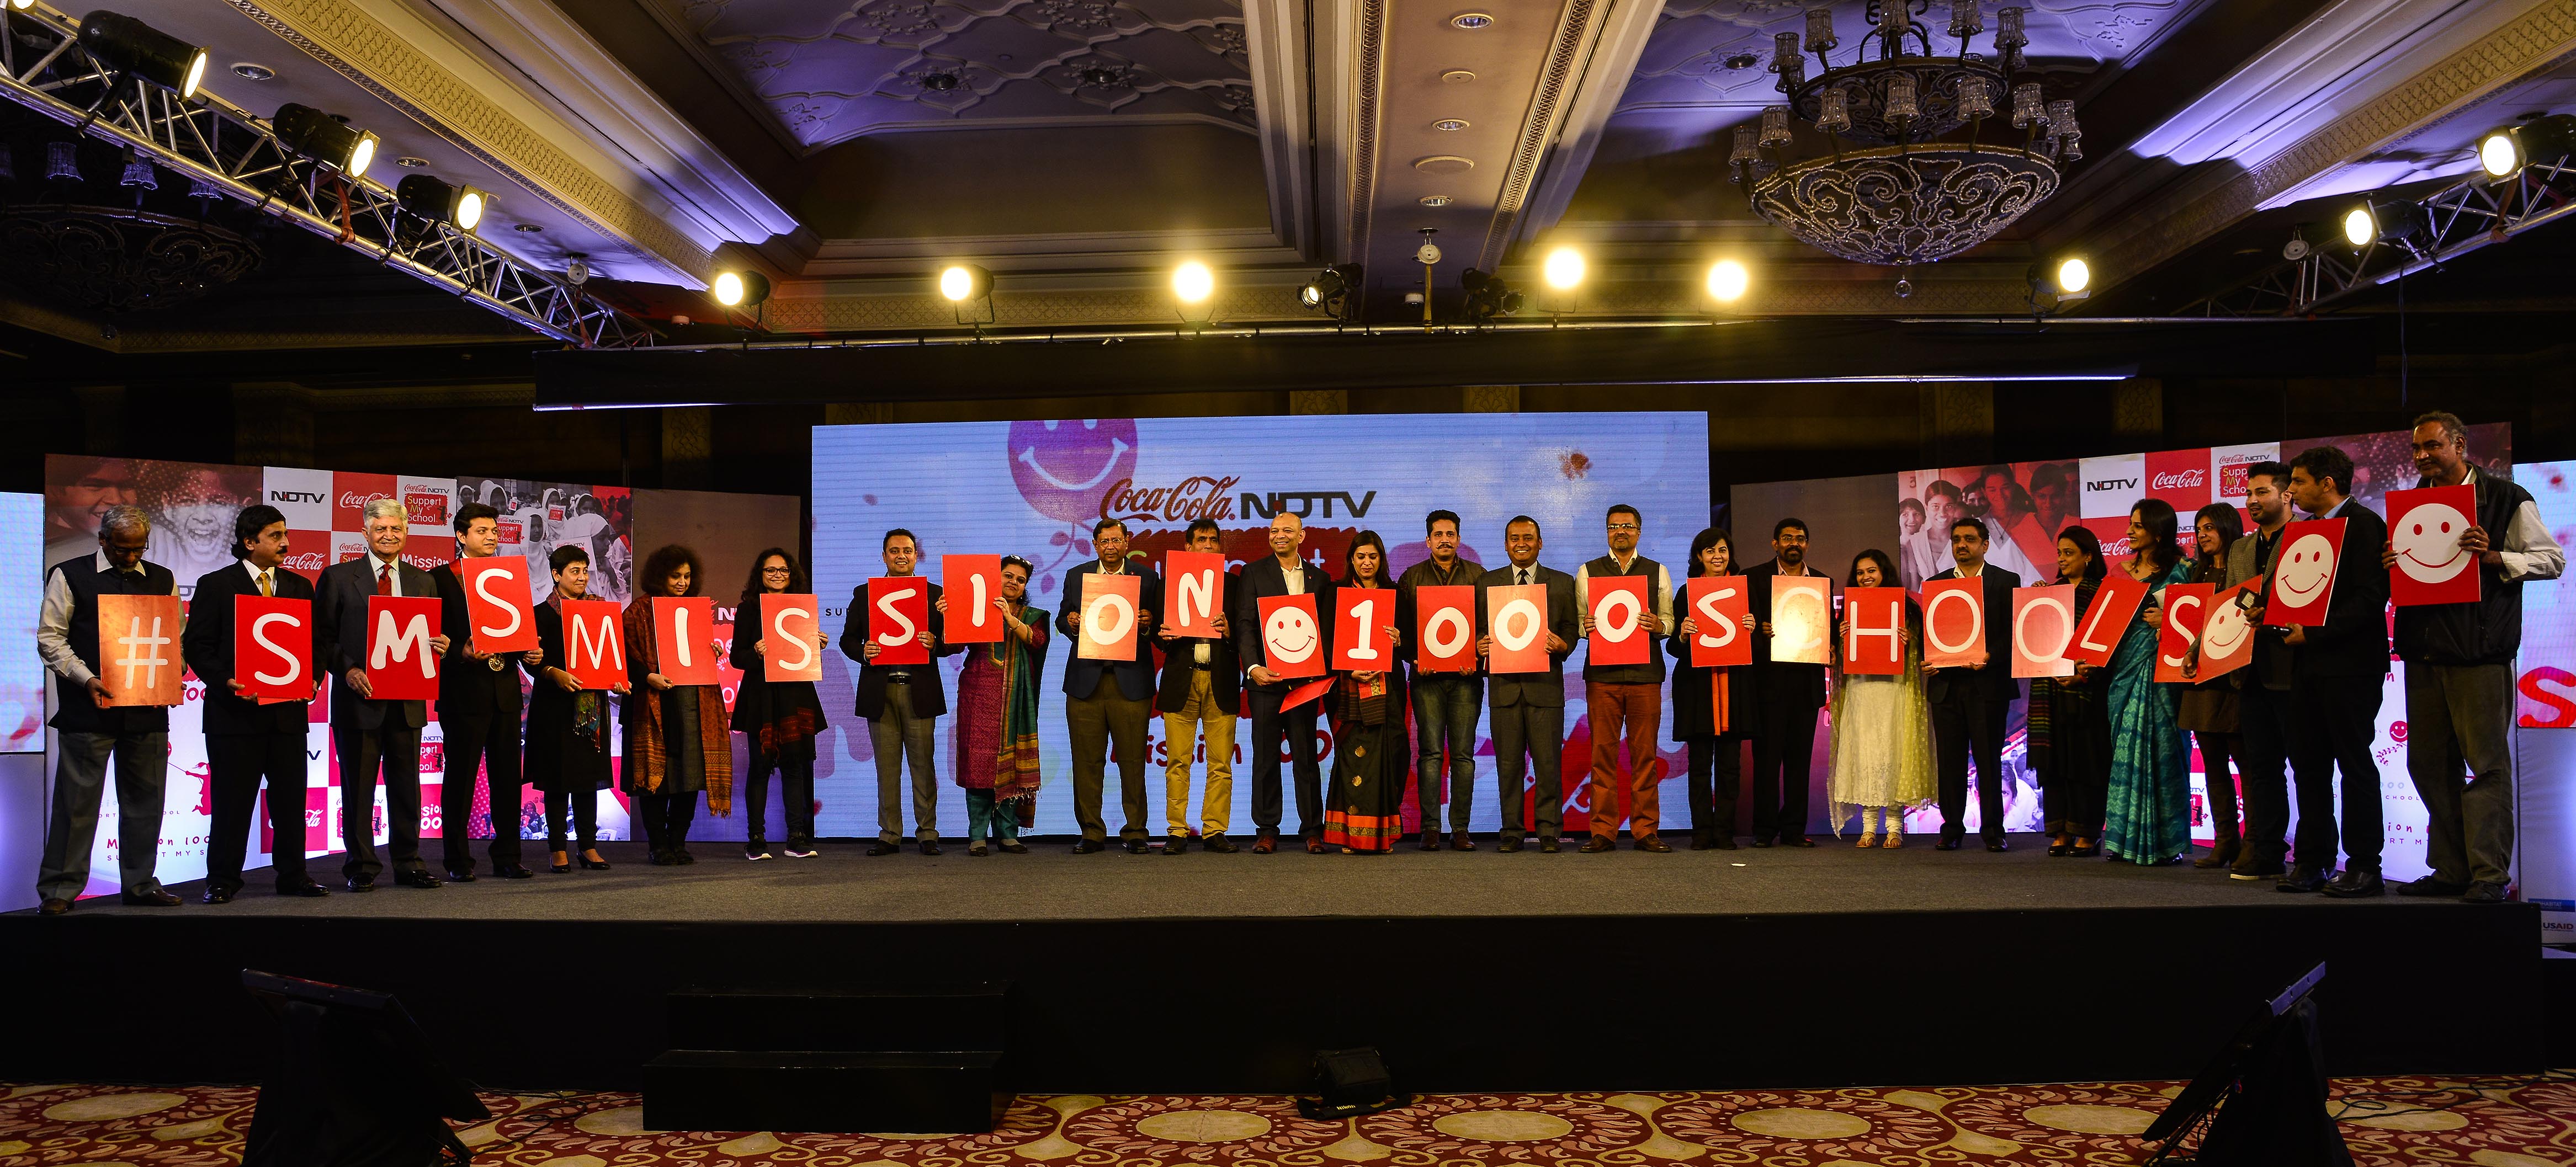 AIF, Coca-Cola India launch ‘SMS Mission Recycling’